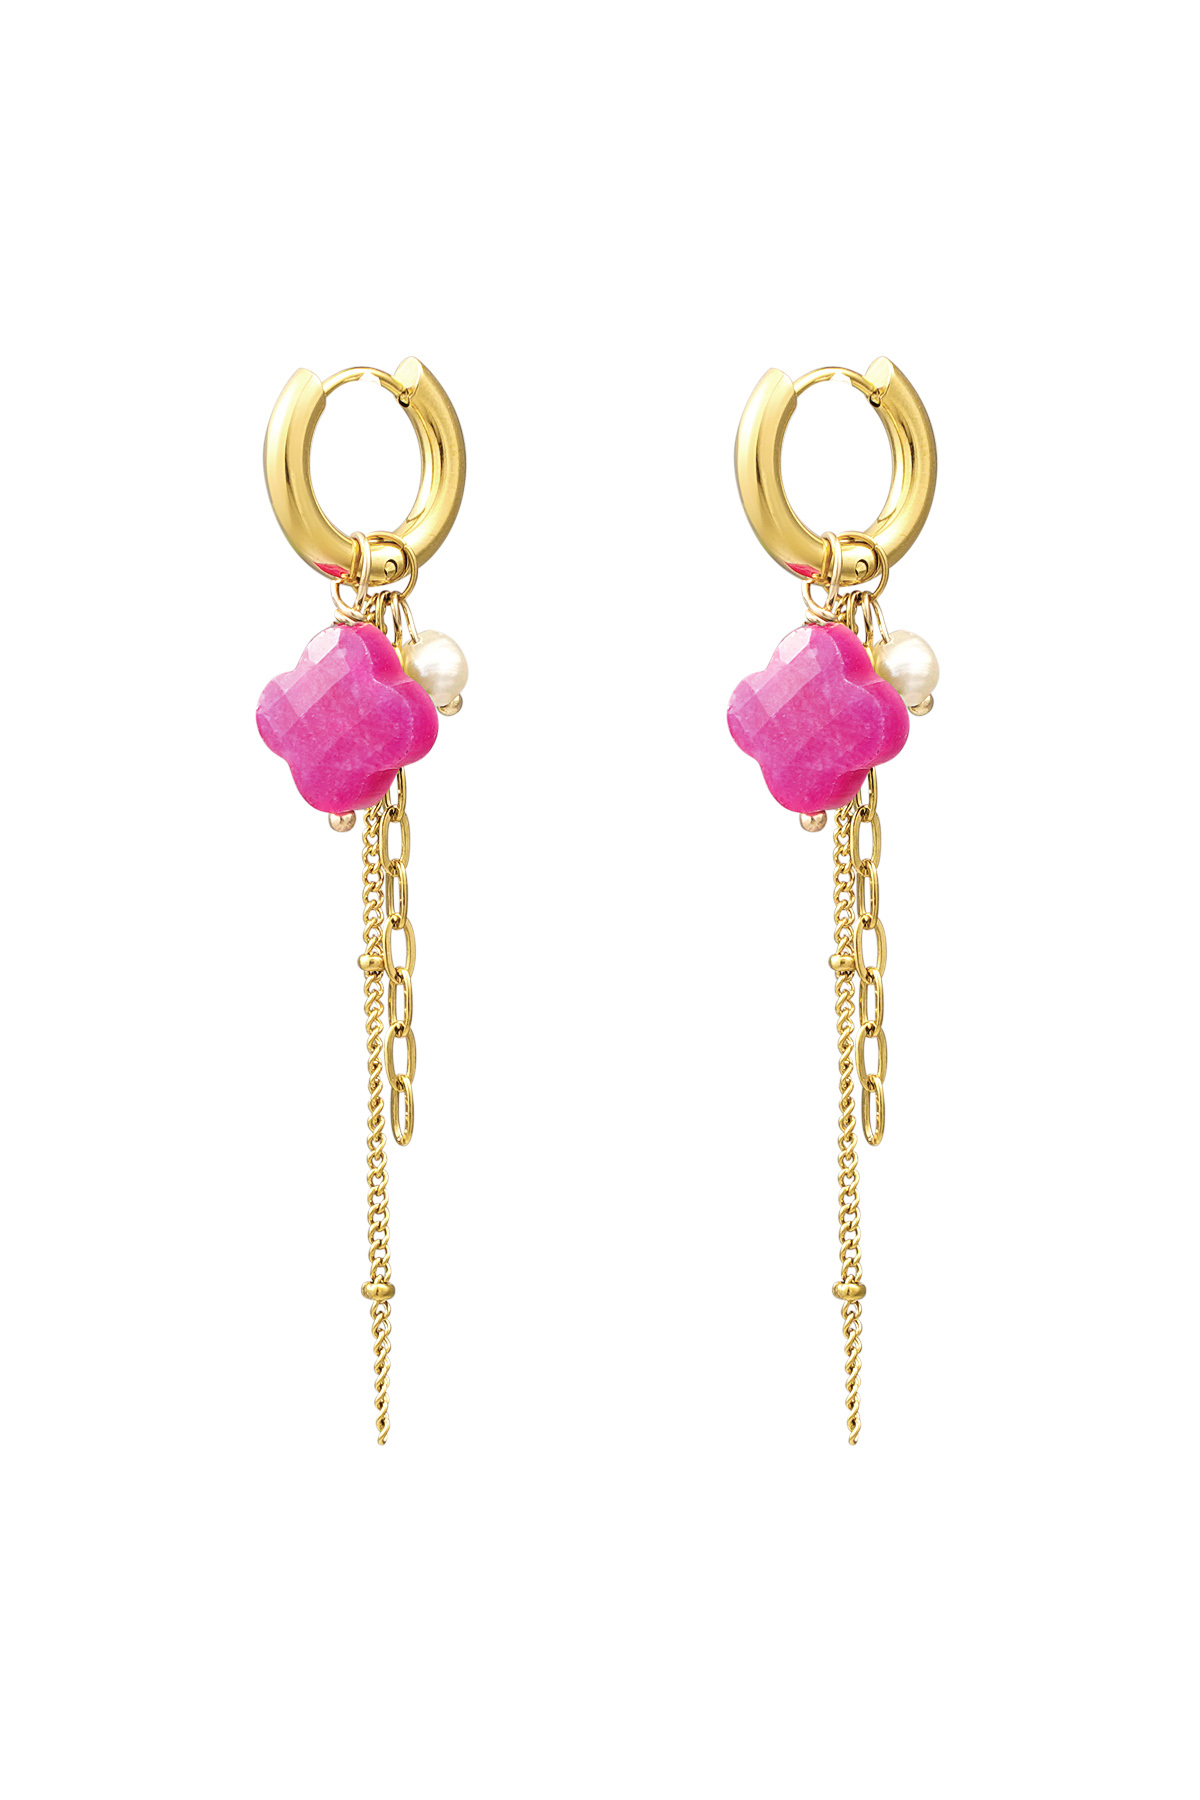 Clover earrings with chains - gold/fuchsia 